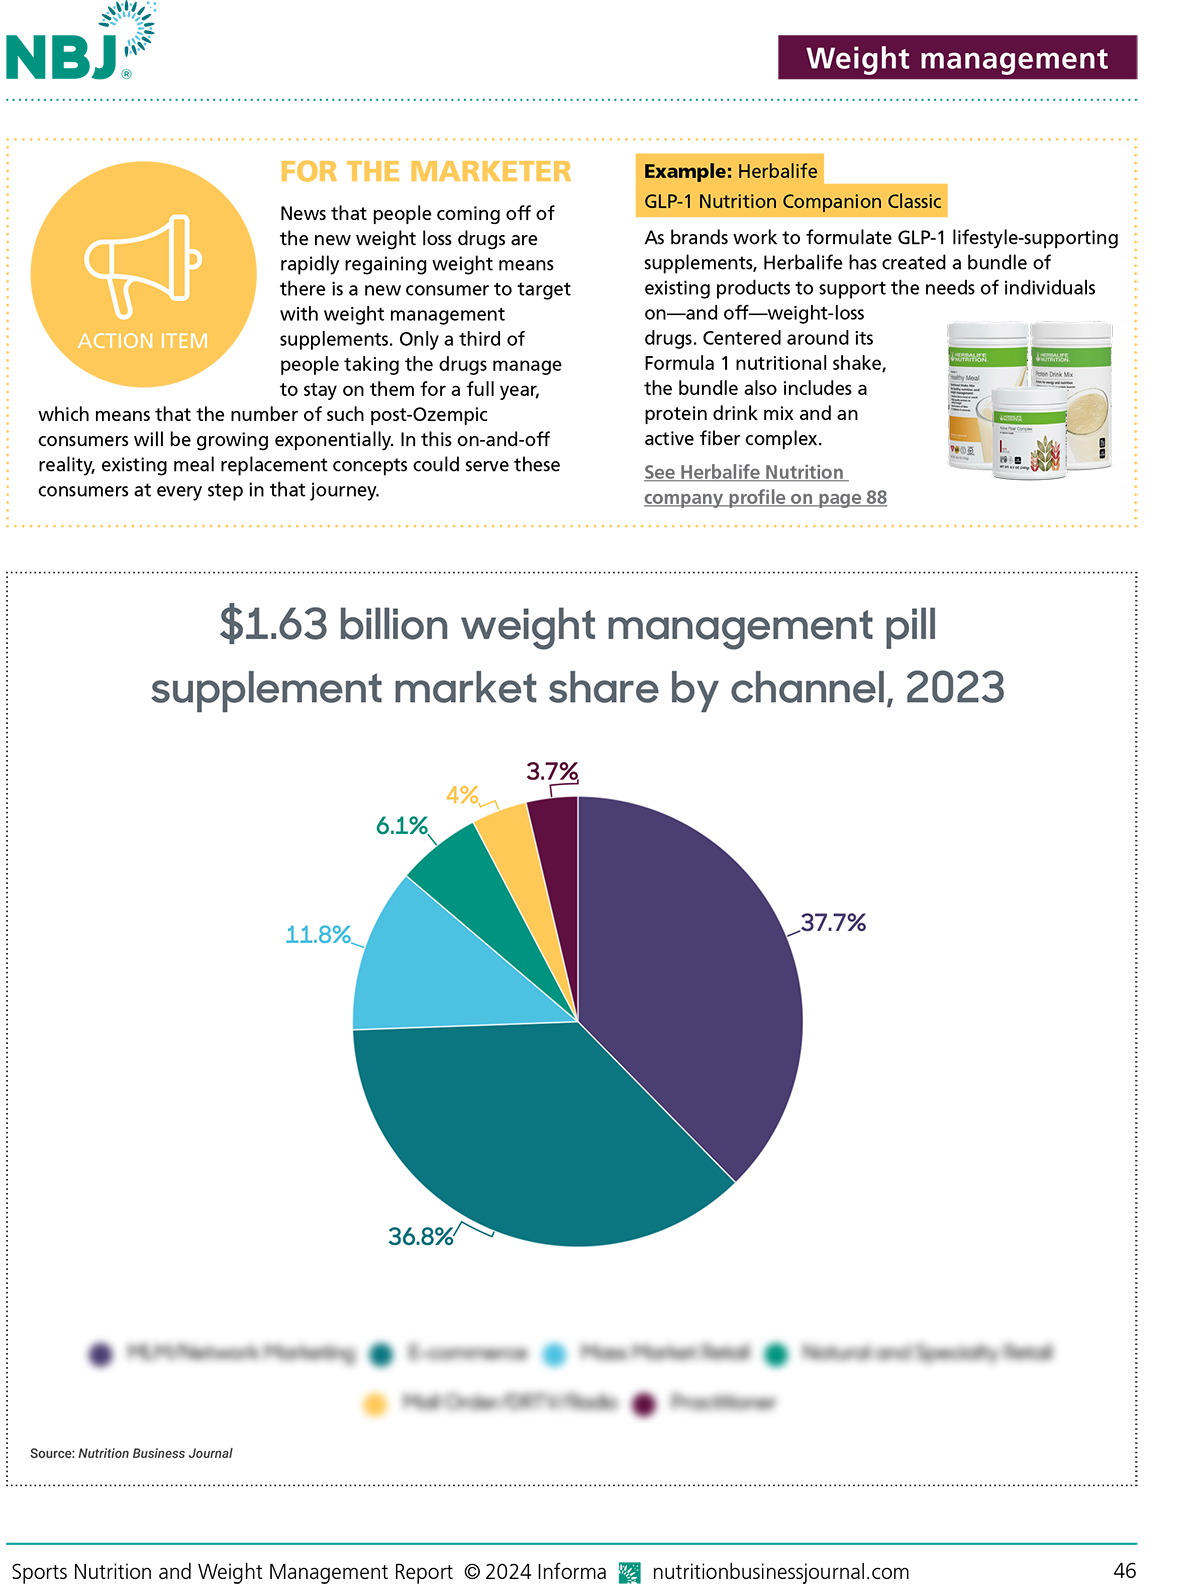 Sports Nutrition and Weight Management Report 2024